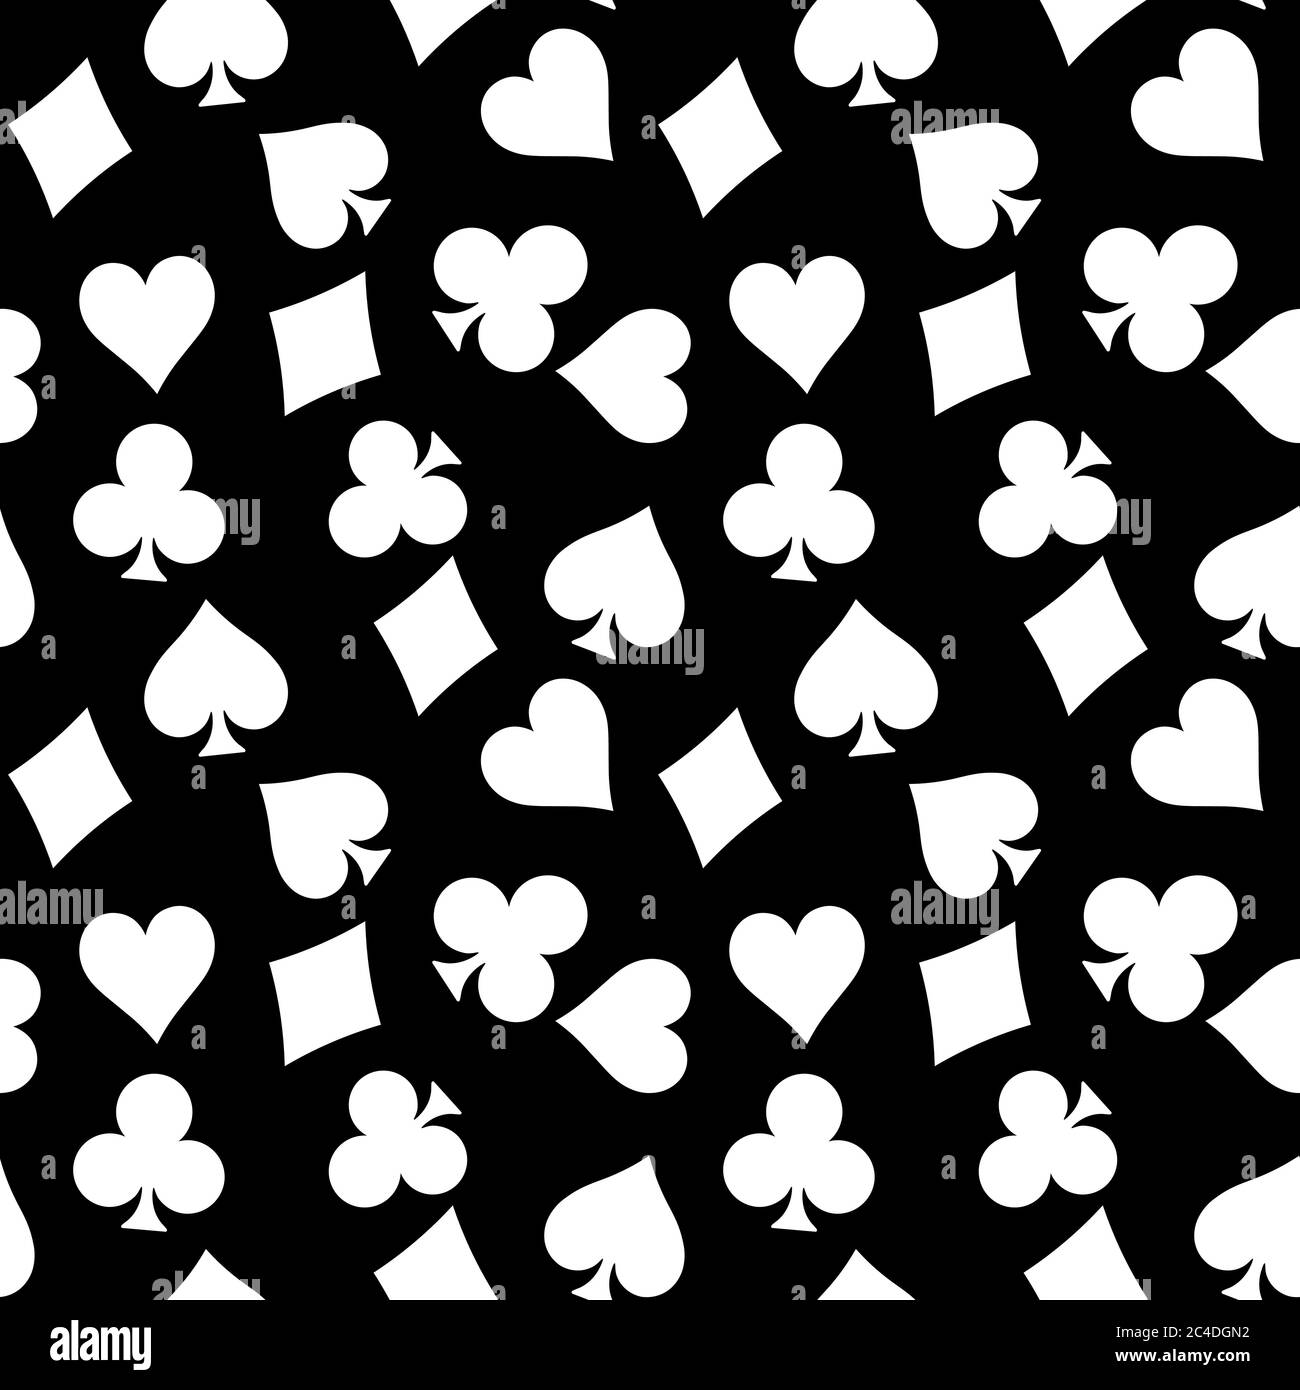 Seamless pattern background of white poker suits - hearts, clubs, spades and diamonds - on black background. Casino gambling theme vector illustration. Stock Vector